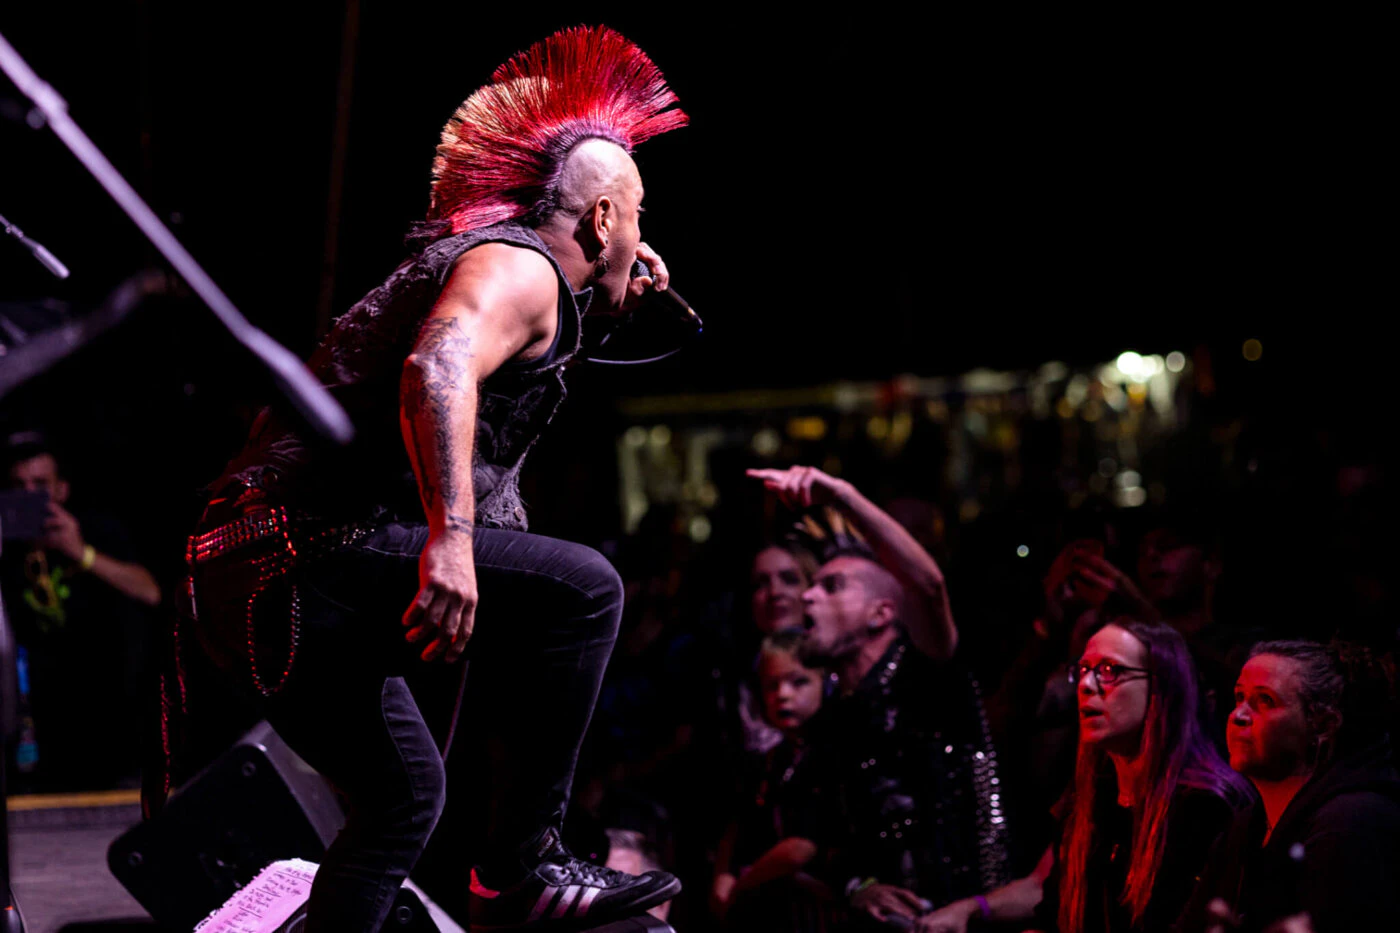 The Casualties perform at the Camp Punksylvania festival in 2022 at Scranton's Circle Drive-In. (Photo: Courtesy Riot Squad Media)